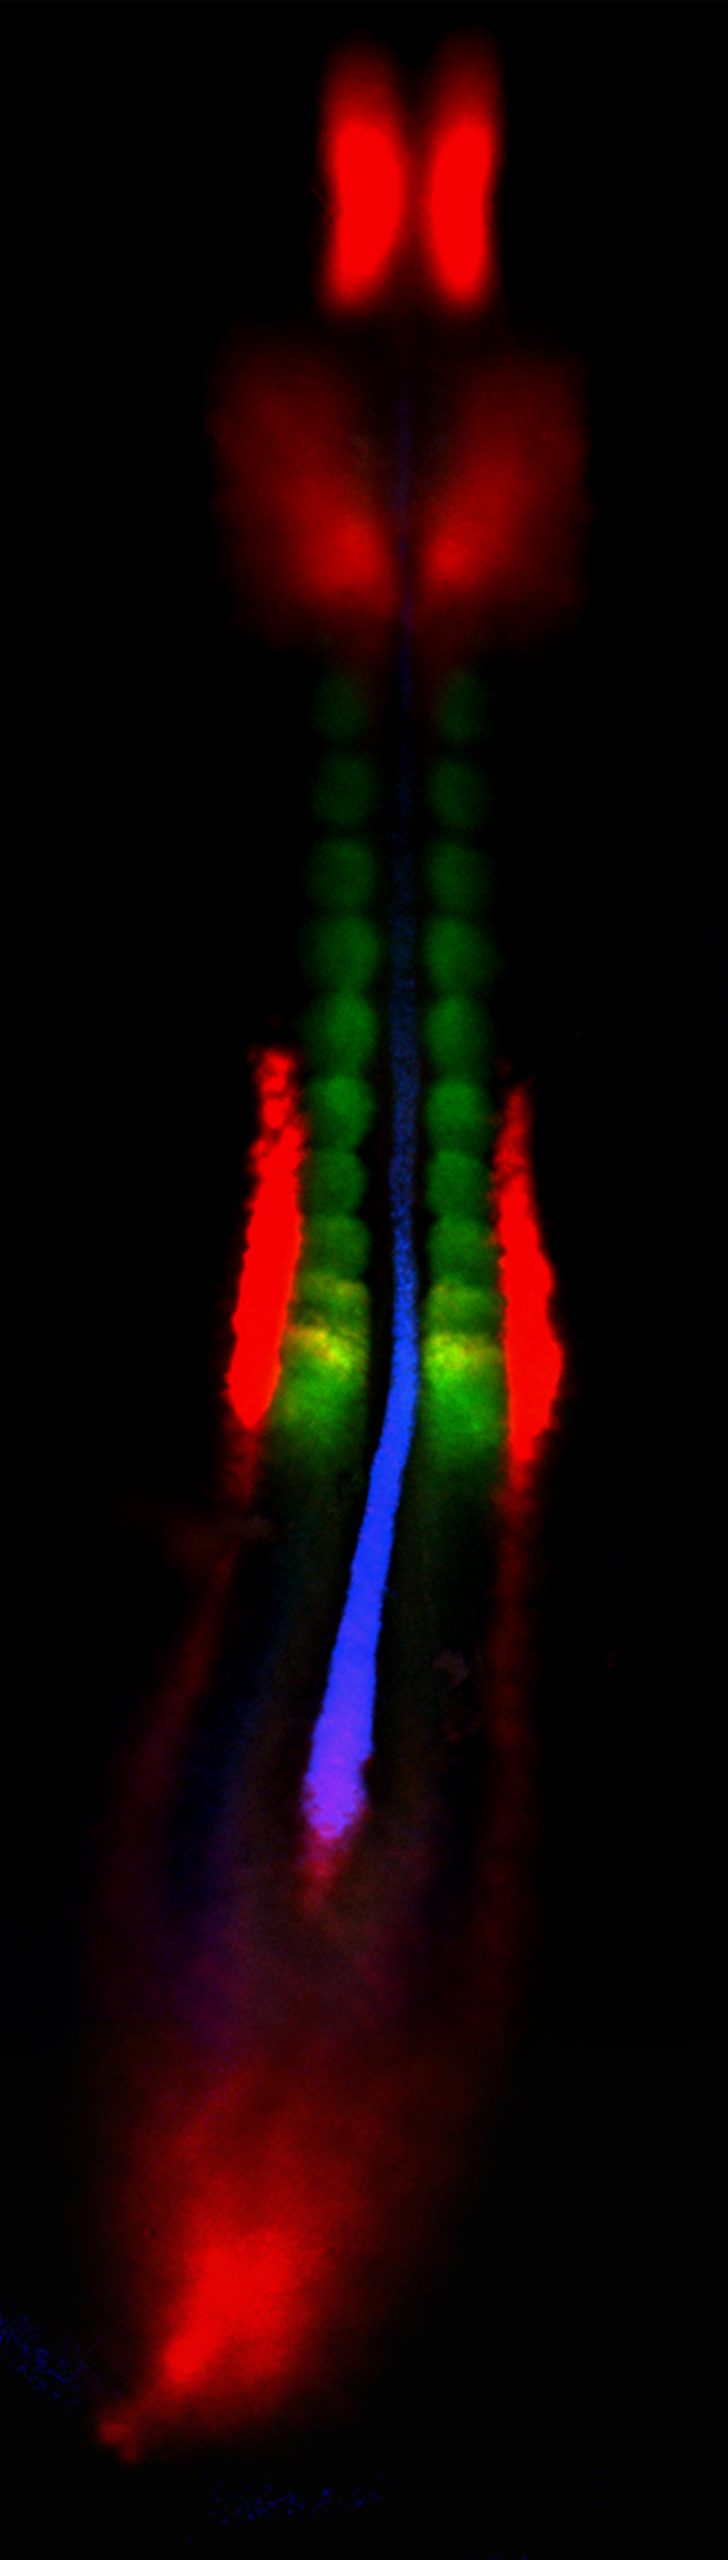 A method developed at the University of Utah uses three fluorescent dyes to show where three different genes are active in a chicken embryo. One gene (indicated by red) is active in the brain (two red bars at top), ears (fuzzy red), early kidneys (middle of image) and the tail bud (bottom). A second gene (green) is active in what are called somites, which become vertebrae and back muscles. A third gene (blue) is active in the notochord, a rodlike structure that gives skeletal support to the early embryo. Where two genes are active in the same area, other colors are seen, such as purple (red plus blue) or yellow (red plus green). Red, green and blue are primary colors for light and thus for fluorescent dyes, unlike paint pigments, for which primary colors are red, yellow and blue.